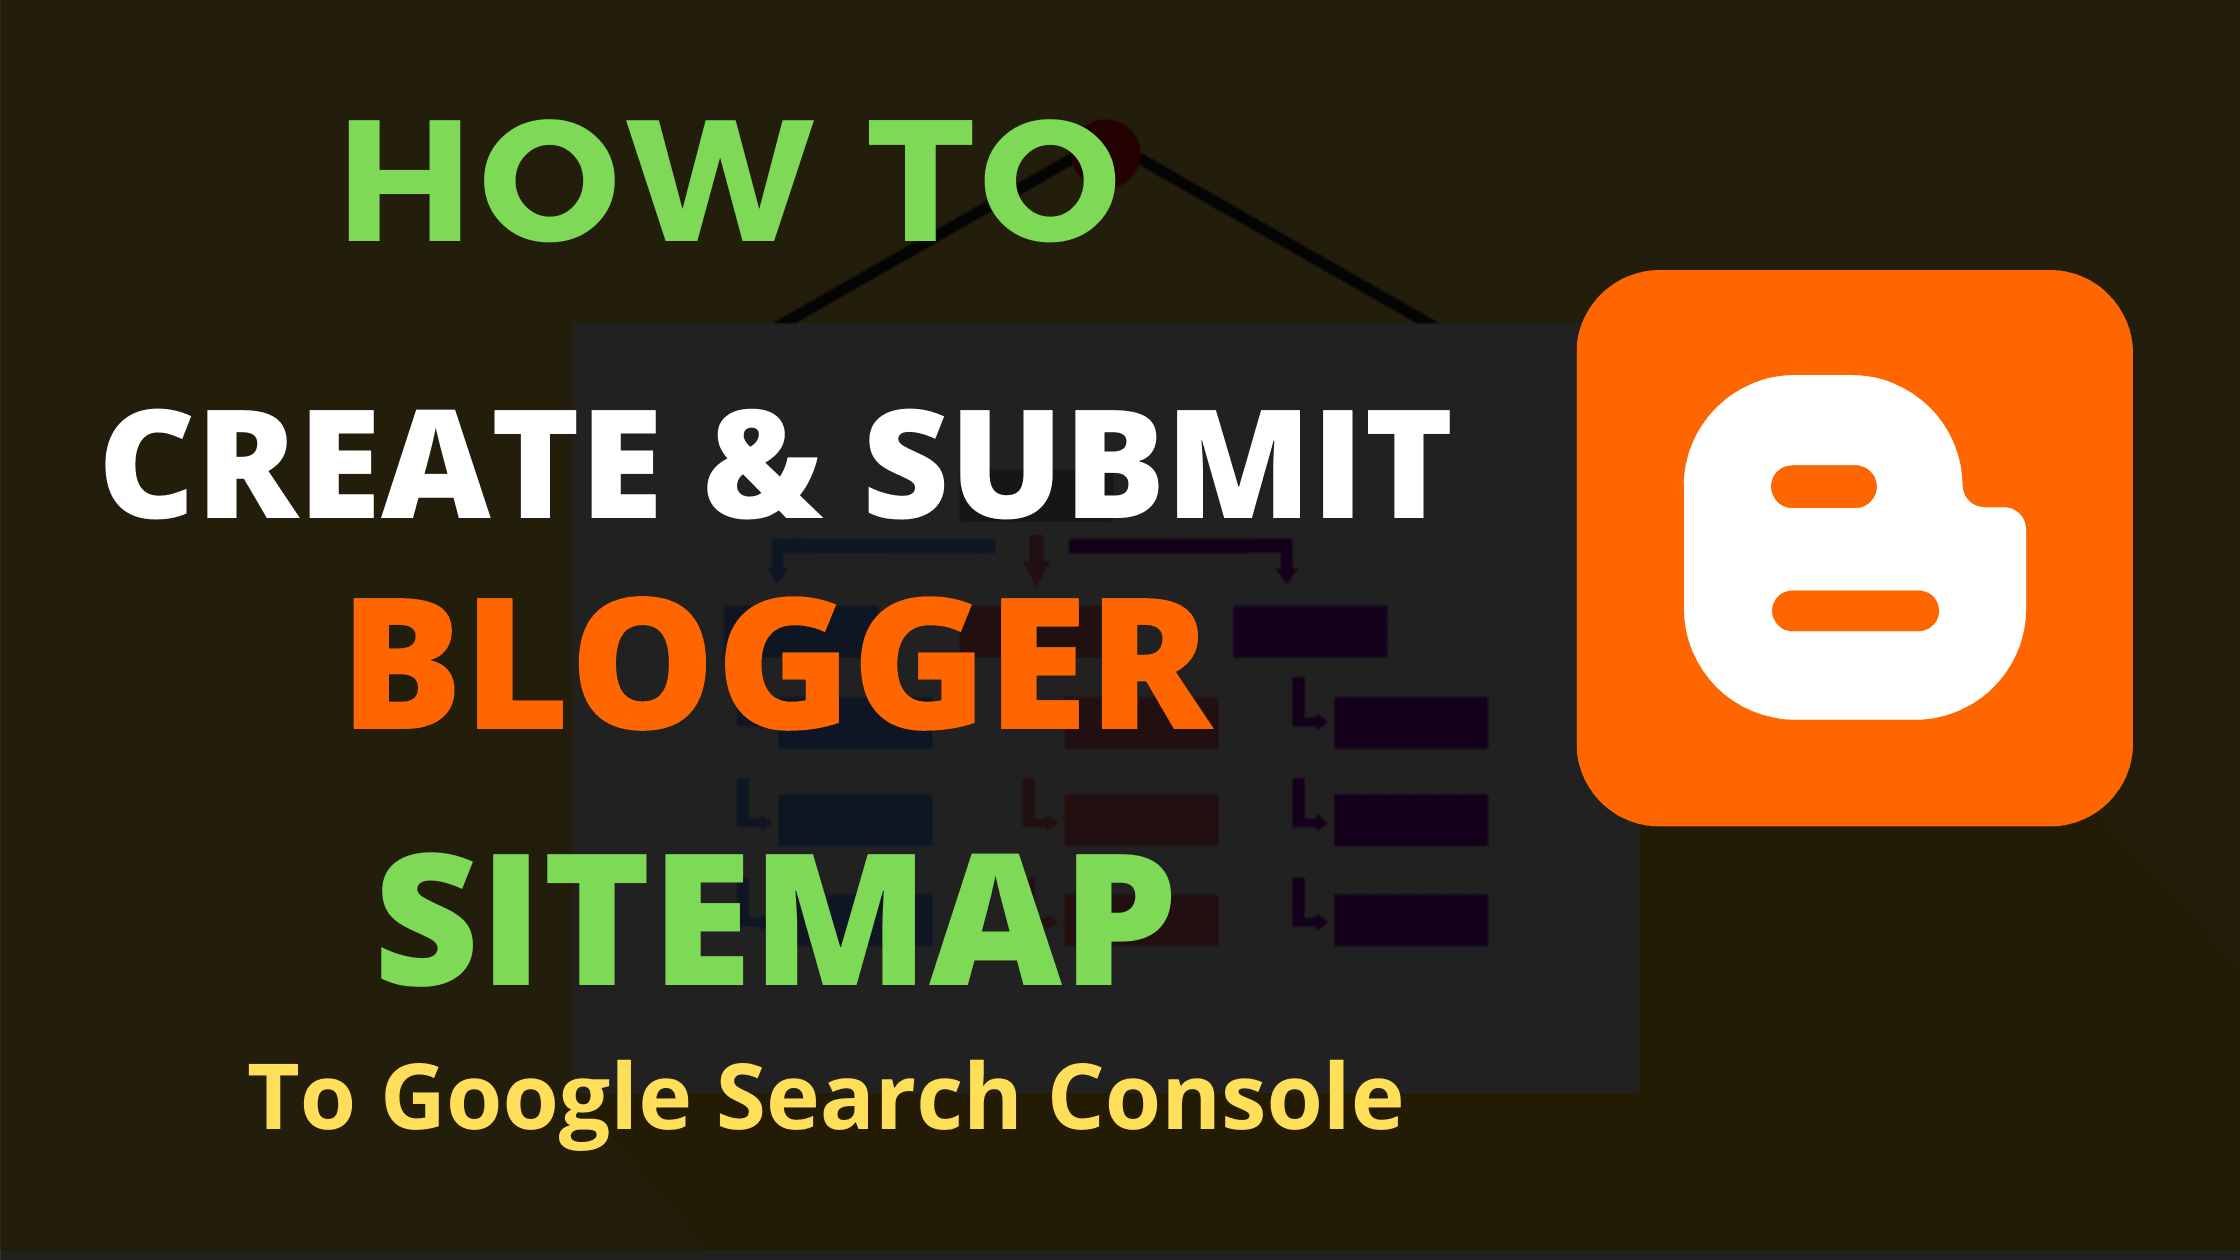 How To Create Blogger Sitemap For Blog And Submit To Google Search Console